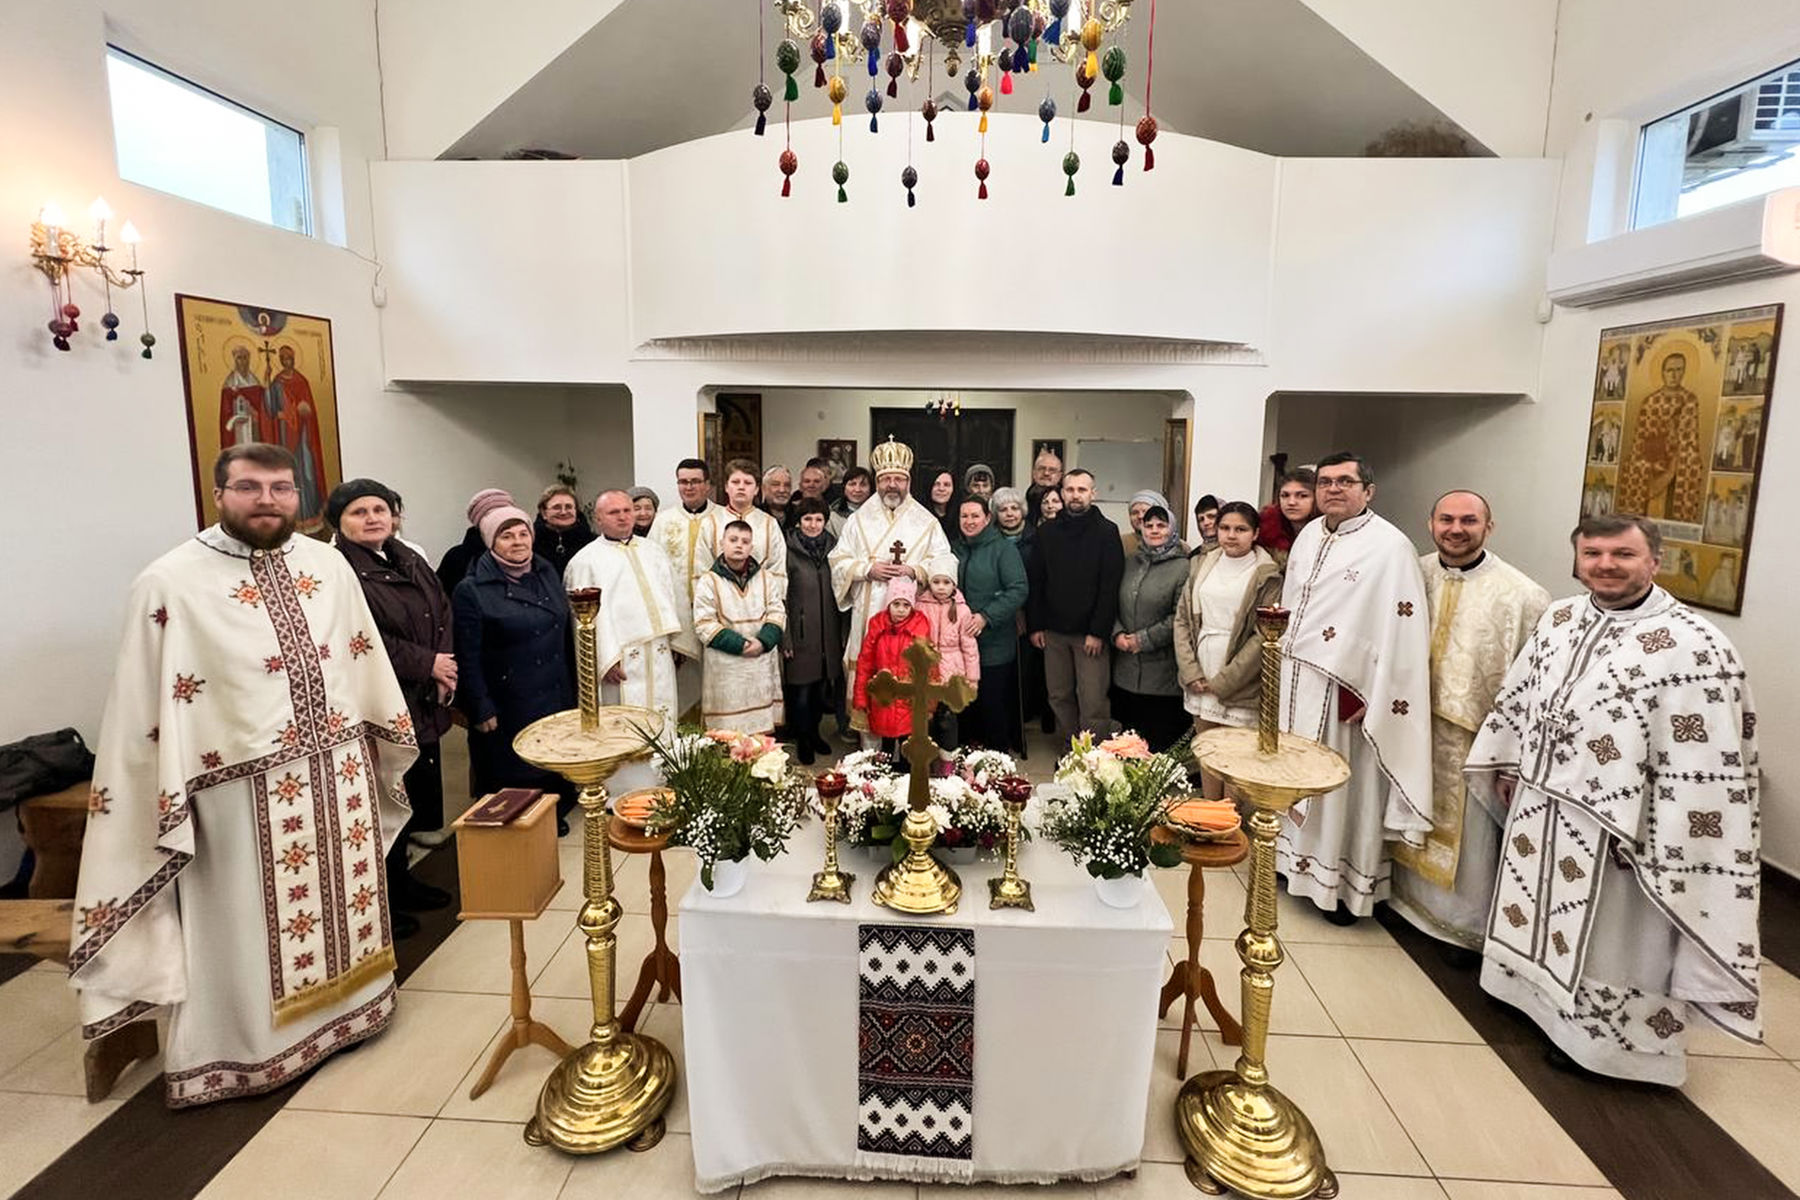 We meet resurrected Christ in Church — within the community of people and within its walls: the Head of the UGCC in Cherkasy